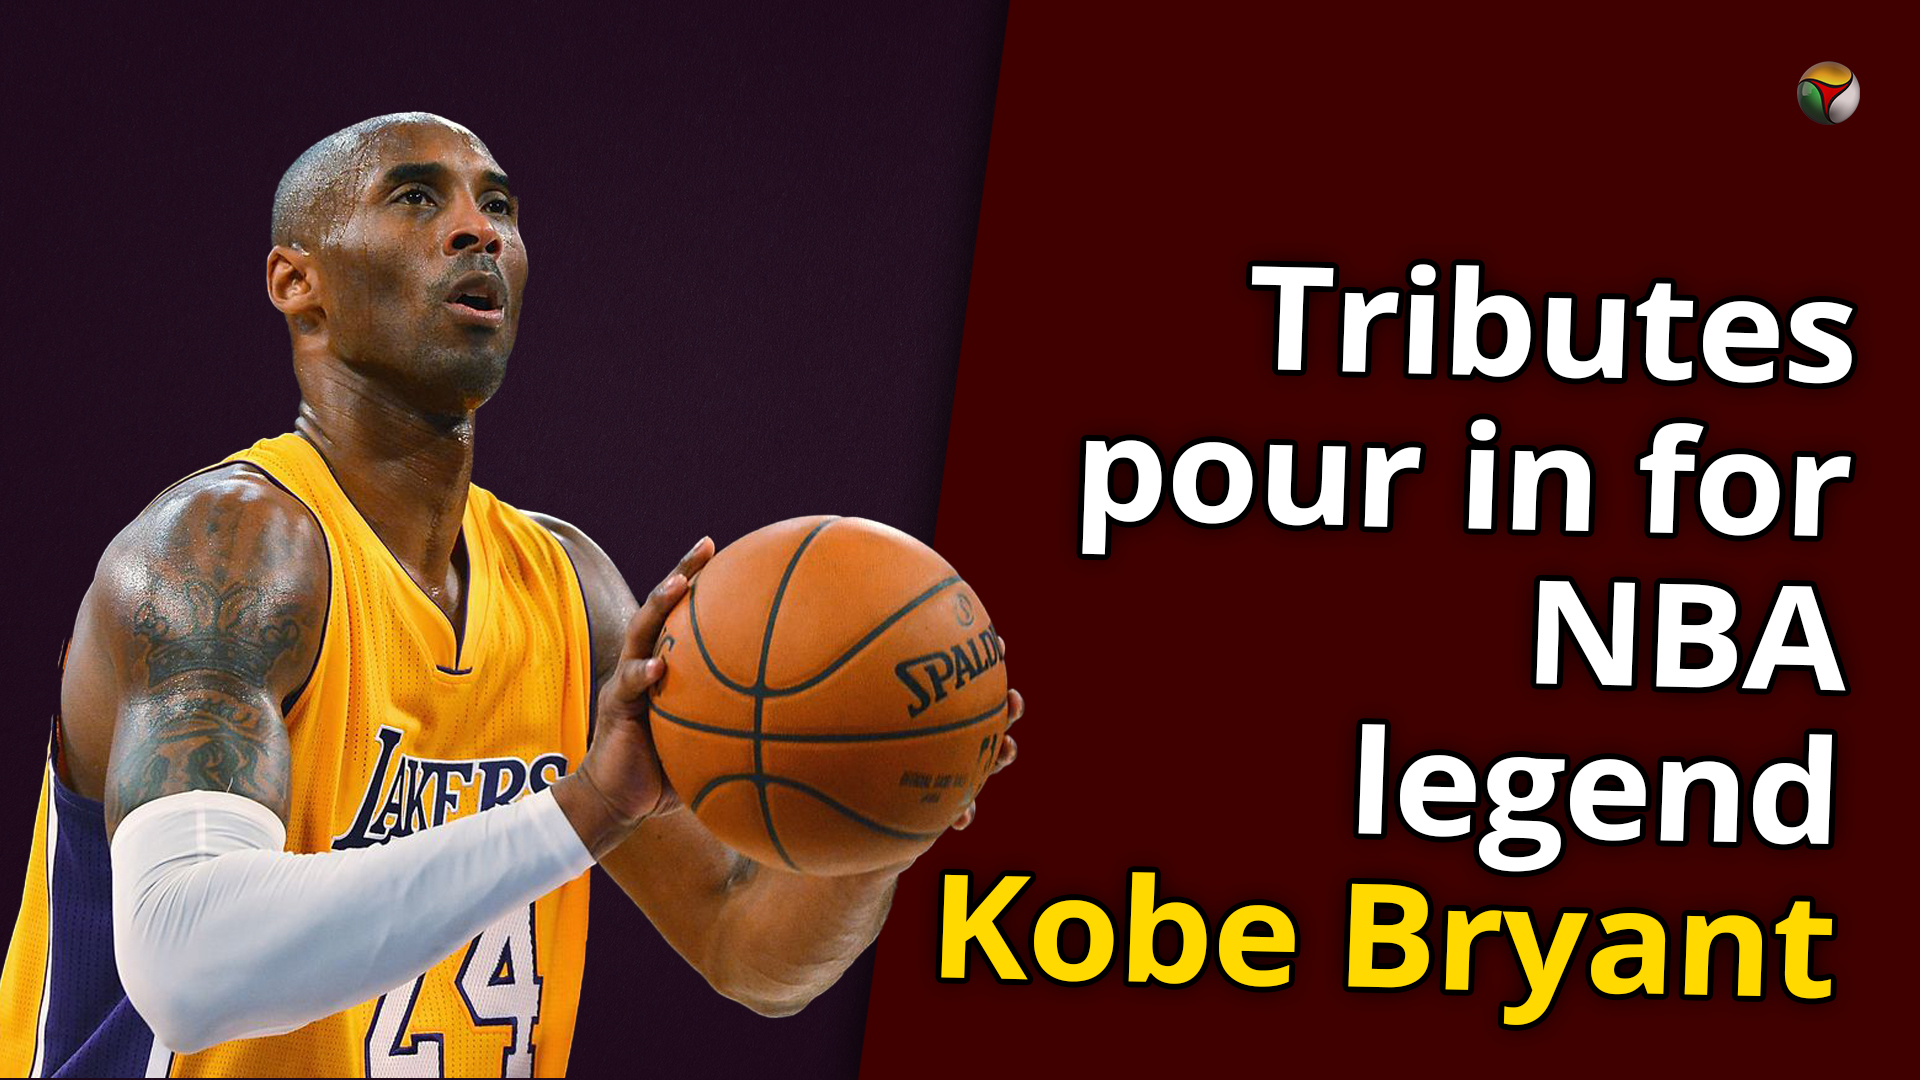 Tributes pour in for NBA legend Kobe Bryant